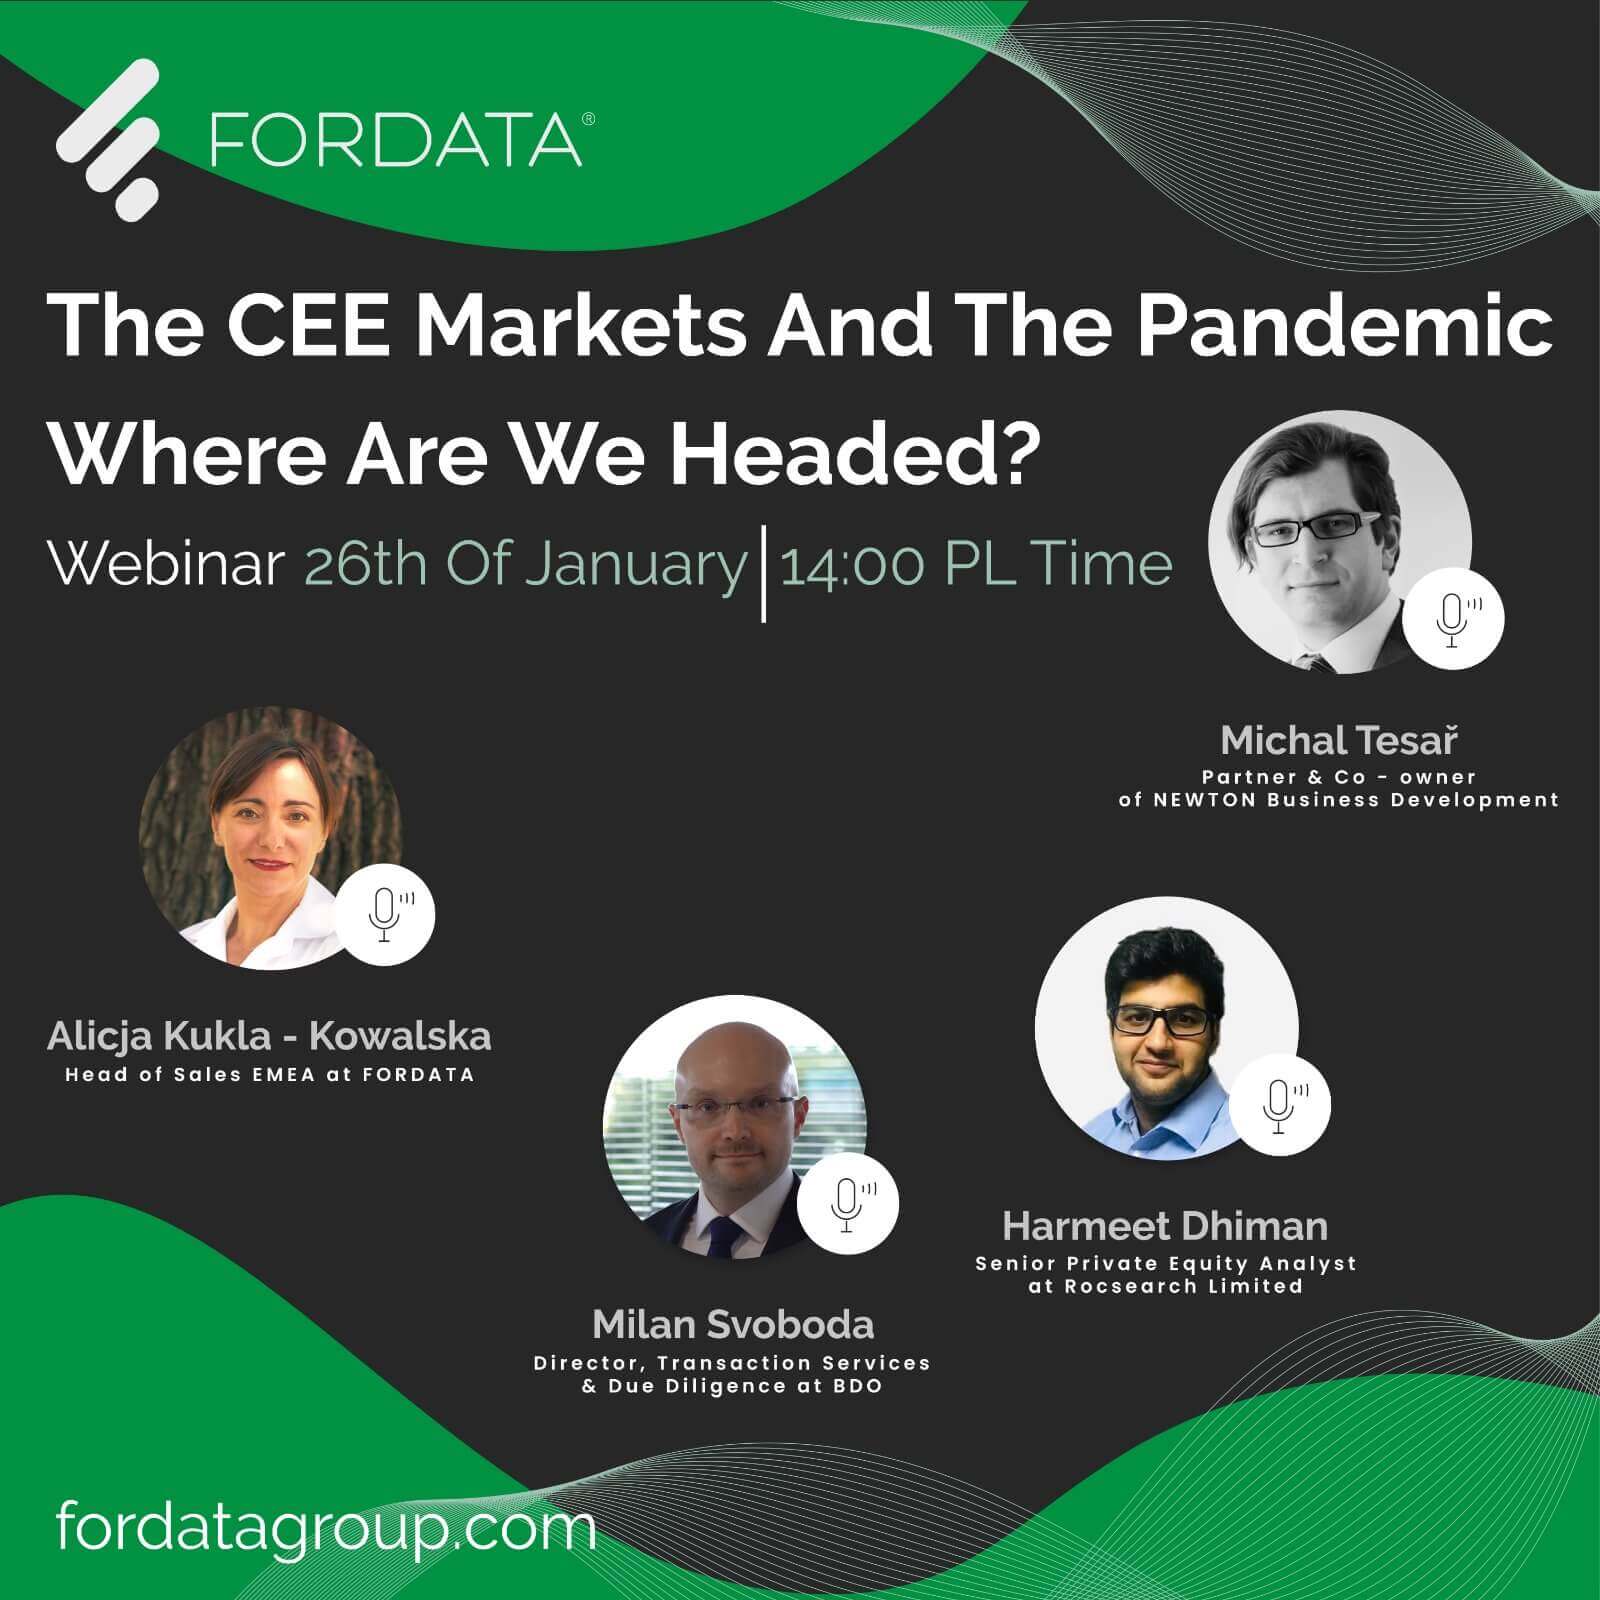 The CEE Markets And The Pandemic Where Are We Headed